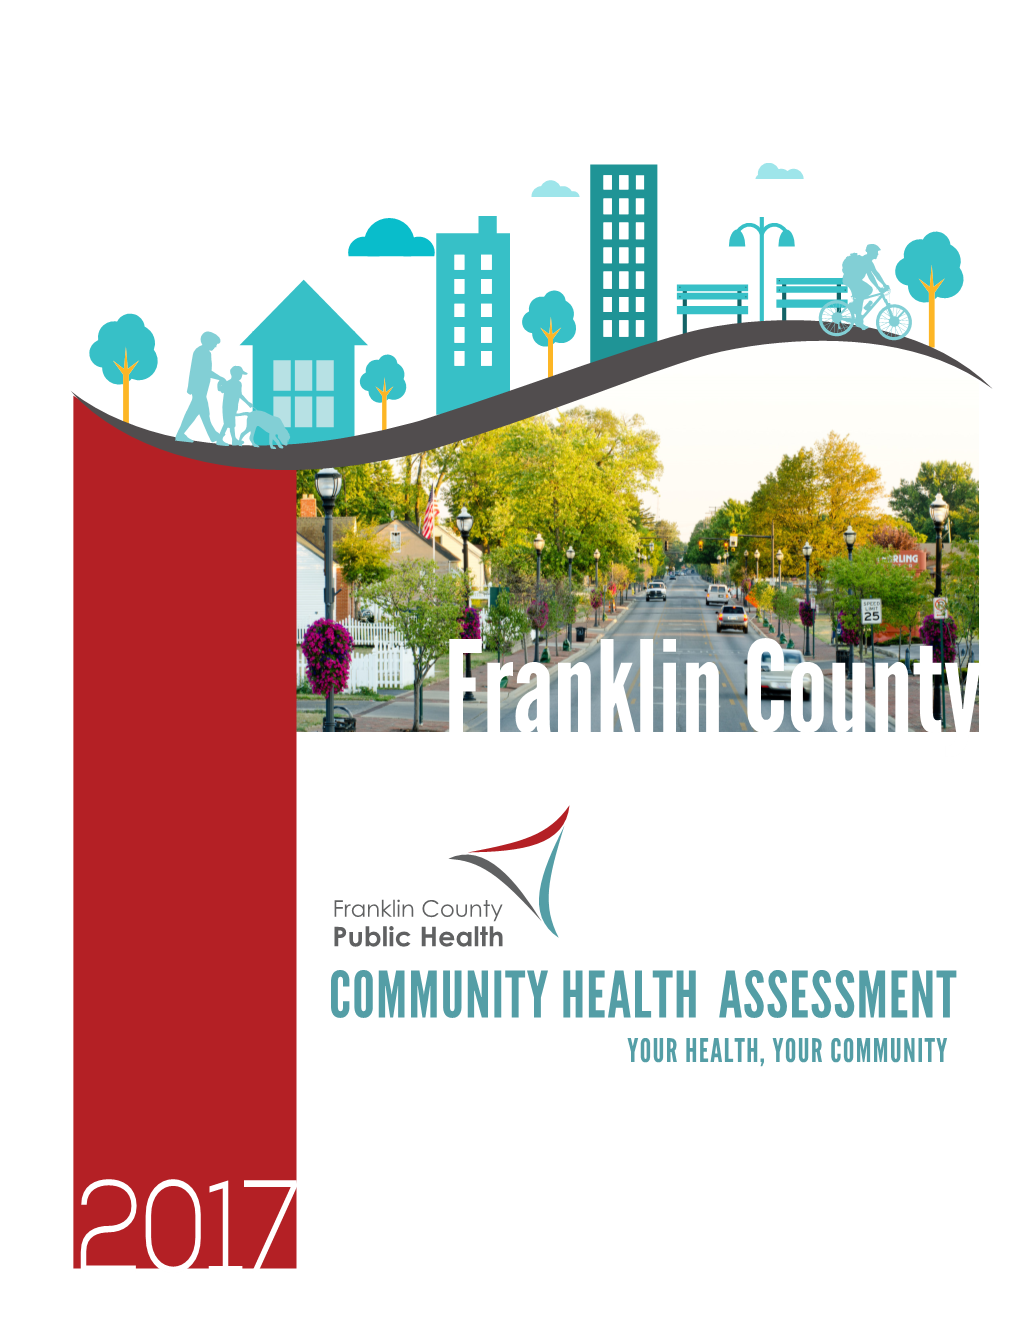 COMMUNITY HEALTH ASSESSMENT YOUR HEALTH, YOUR COMMUNITY 2017 Franklin County Community Proﬁle YOUR HEALTH, YOUR COMMUNITY